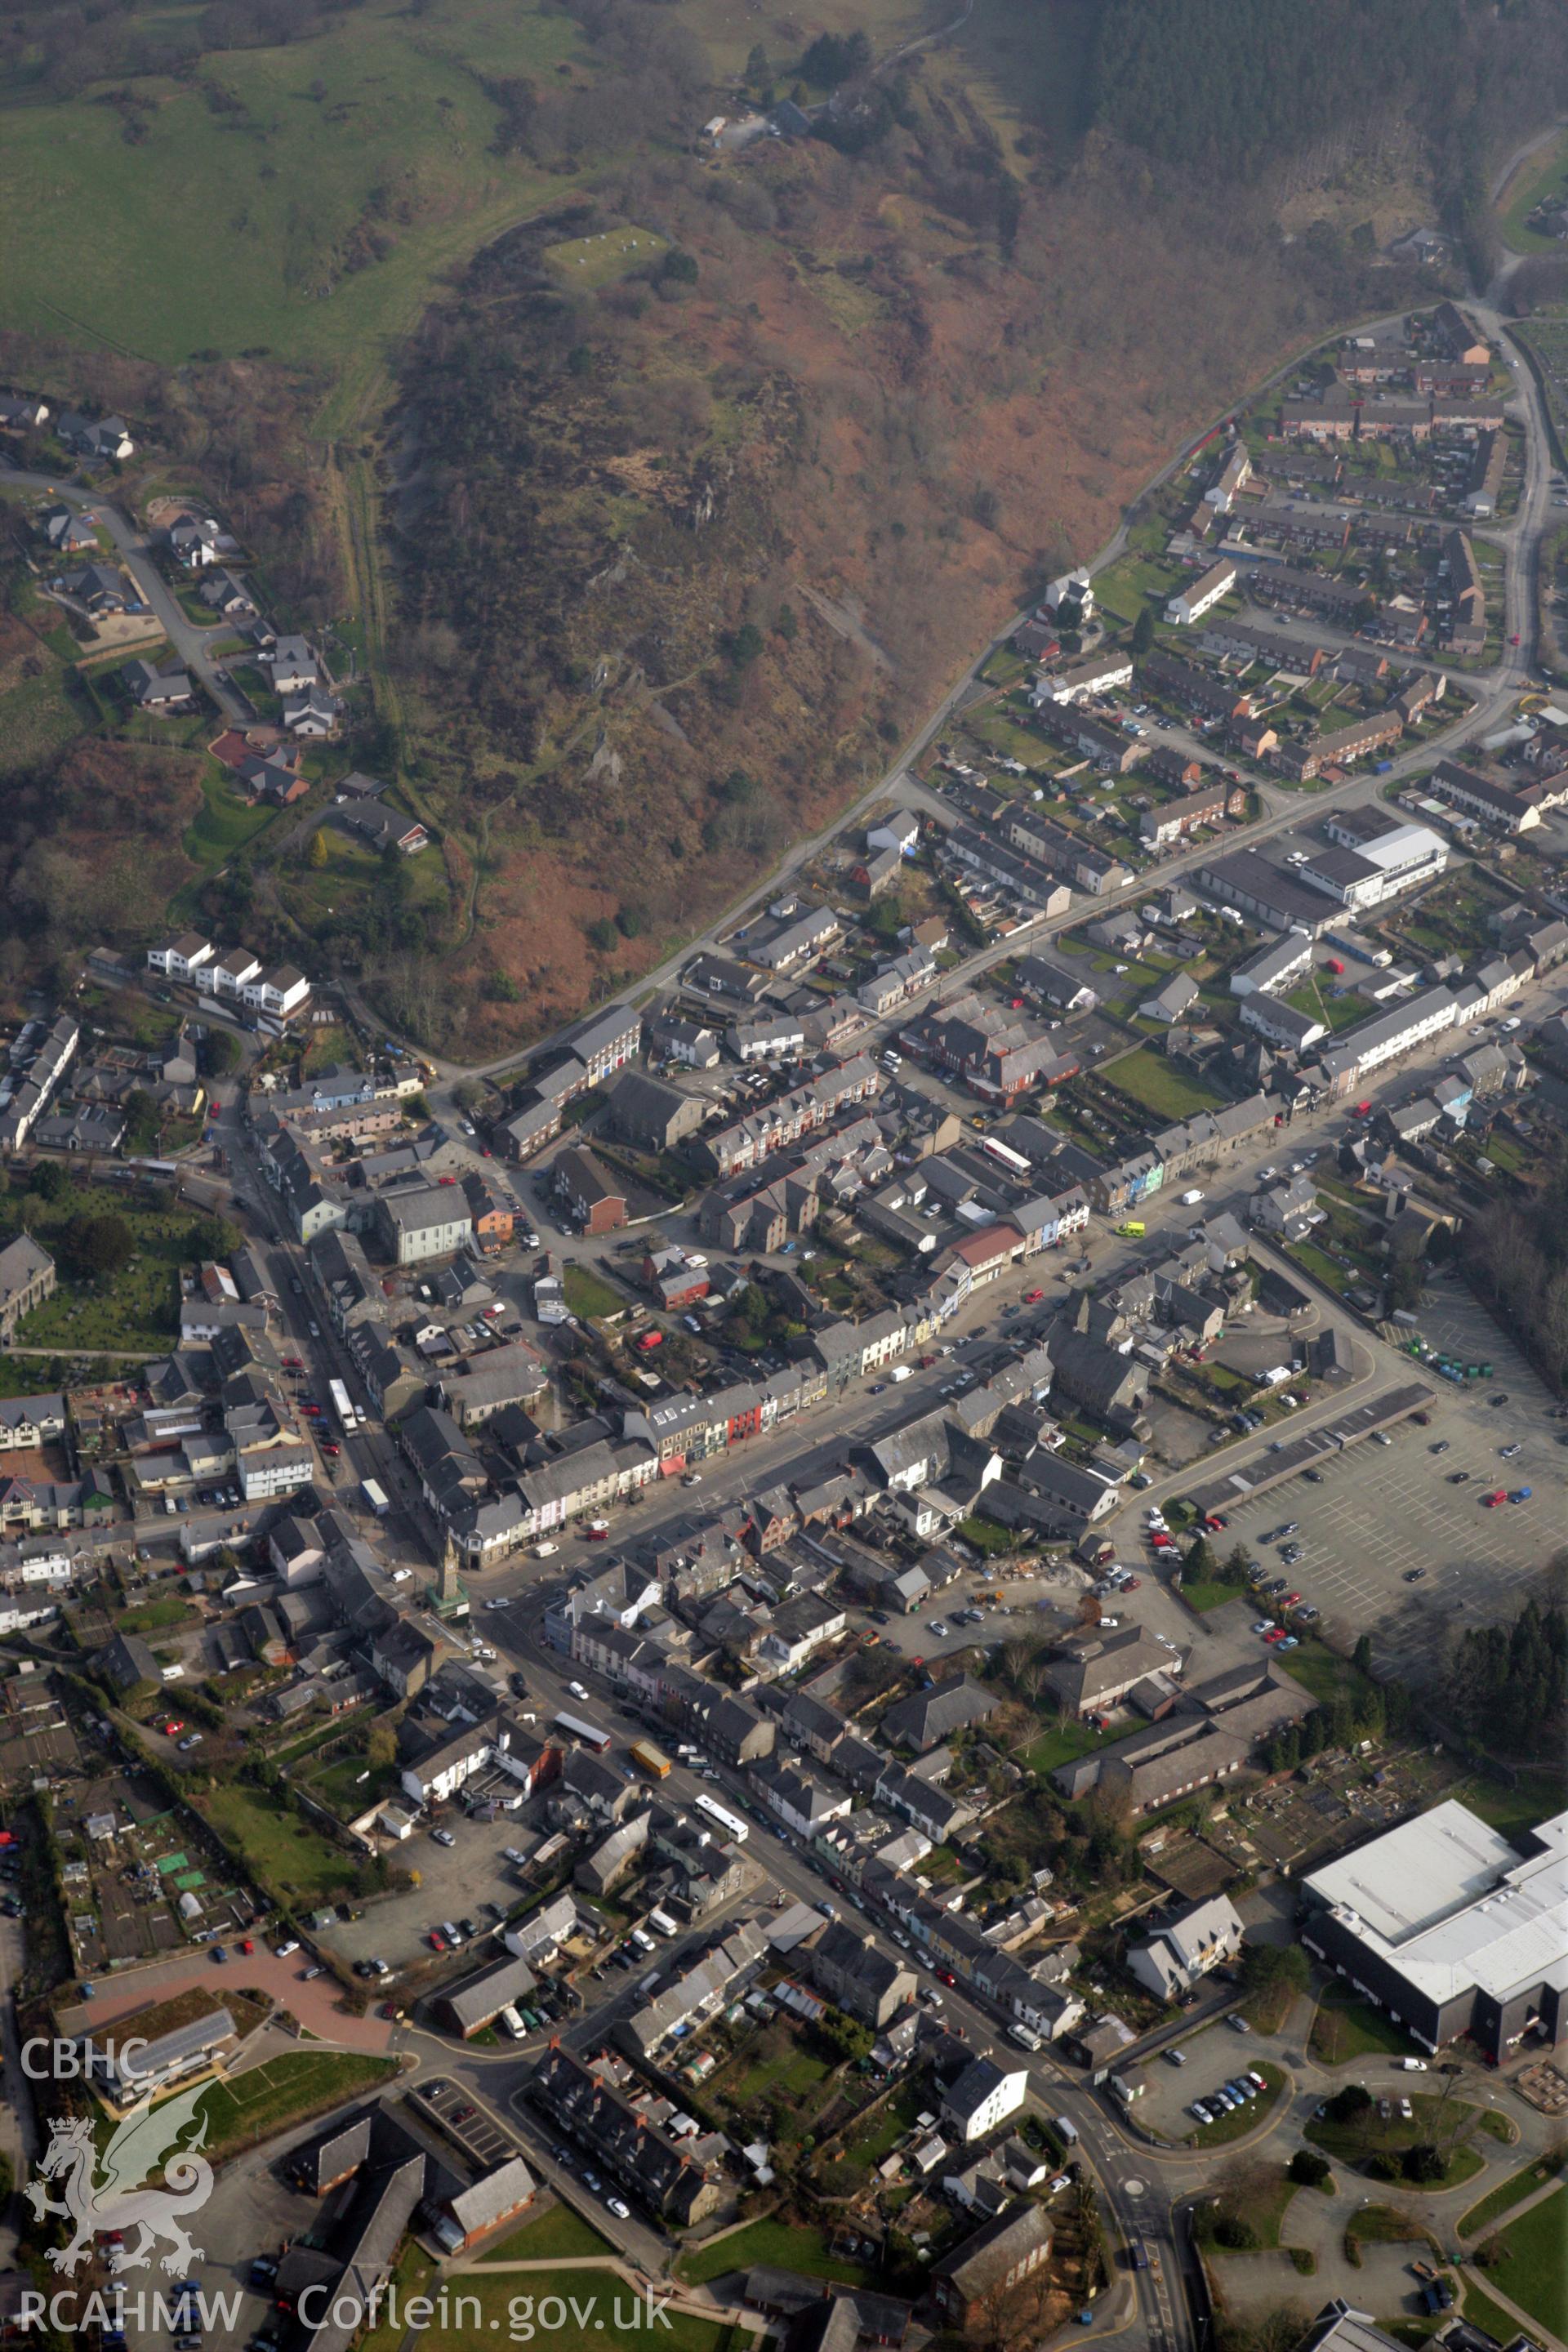 RCAHMW colour oblique photograph of Machynlleth. Taken by Toby Driver on 25/03/2011.